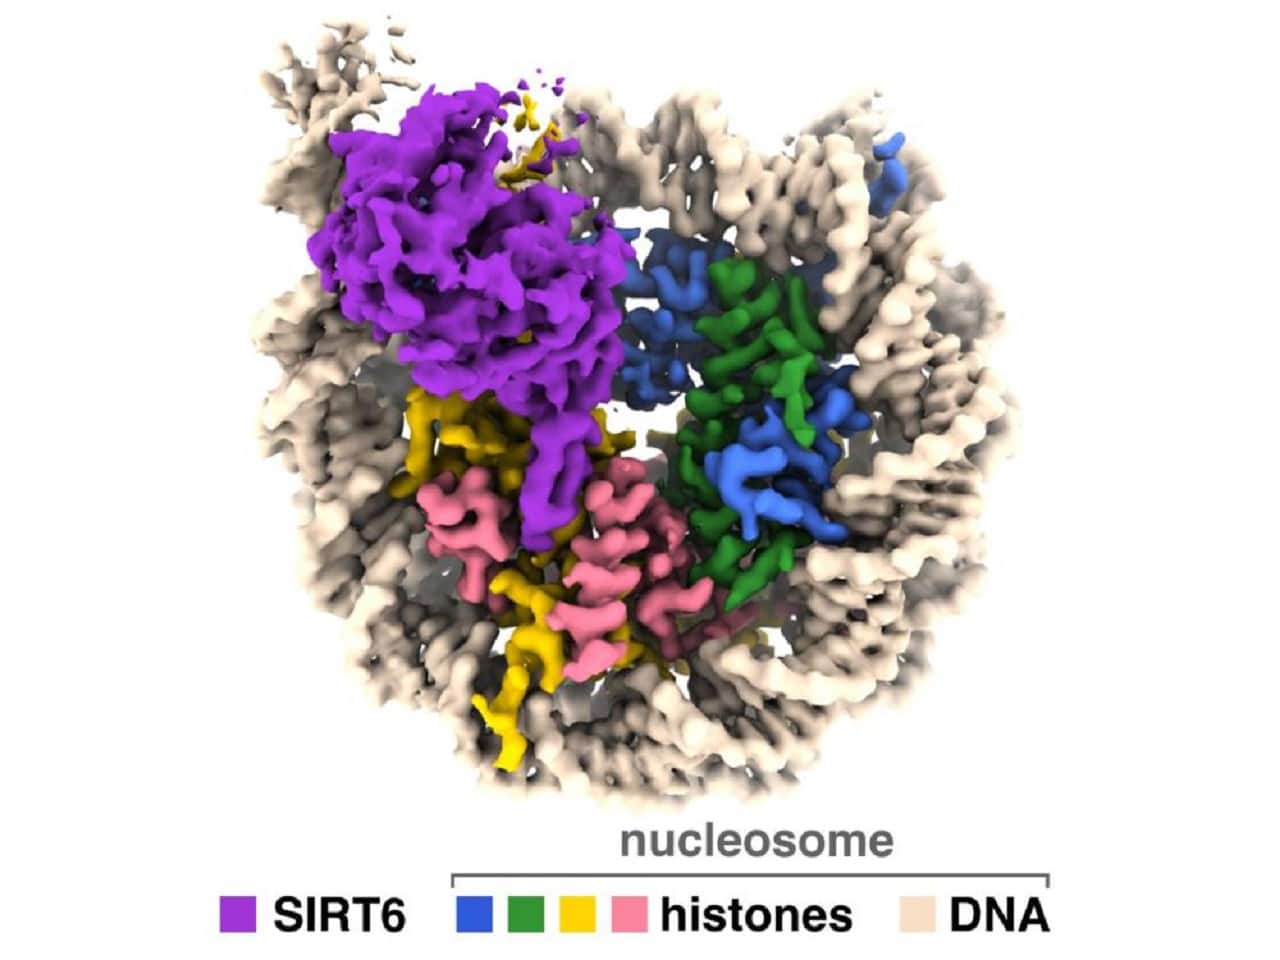 Image showing SIRT6 enzyme